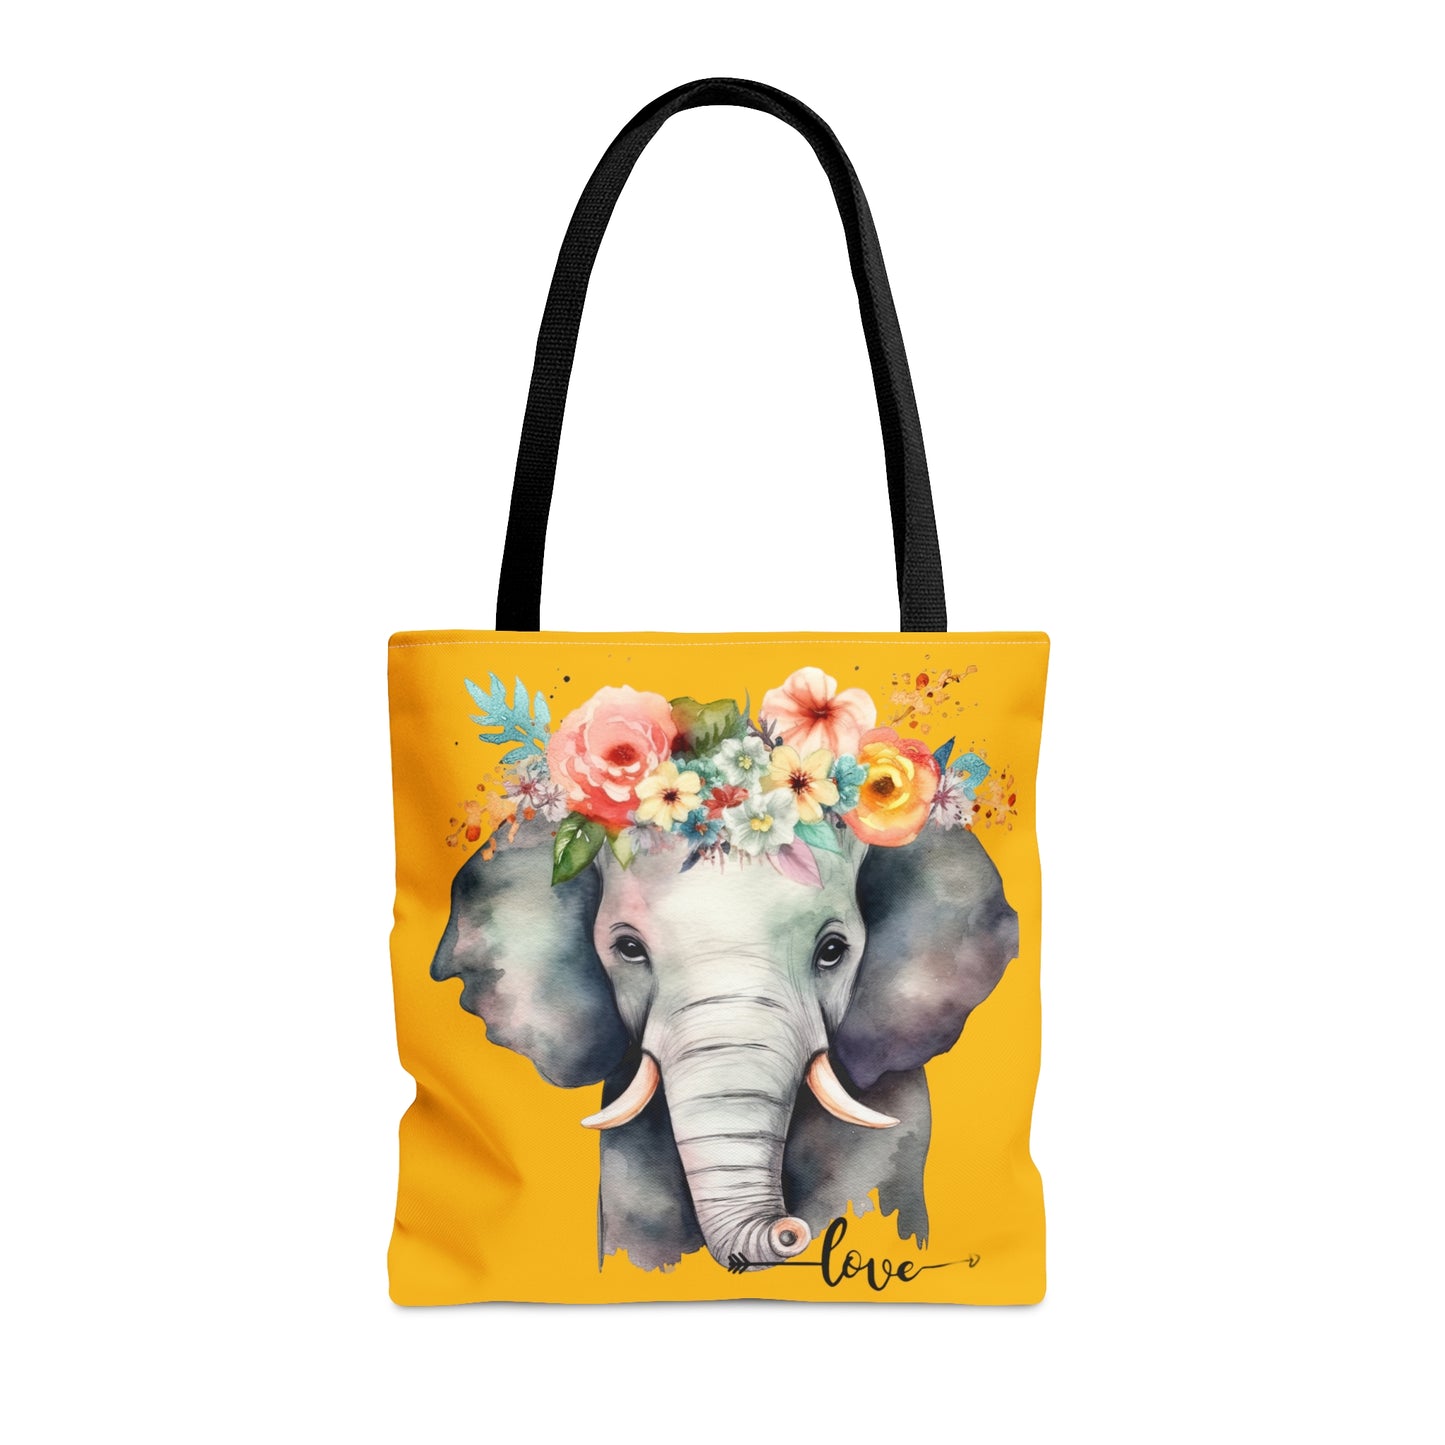 Cute mama elephant with flowers for a tiara on this tote bag. Come in 3 sizes to meet your needs.